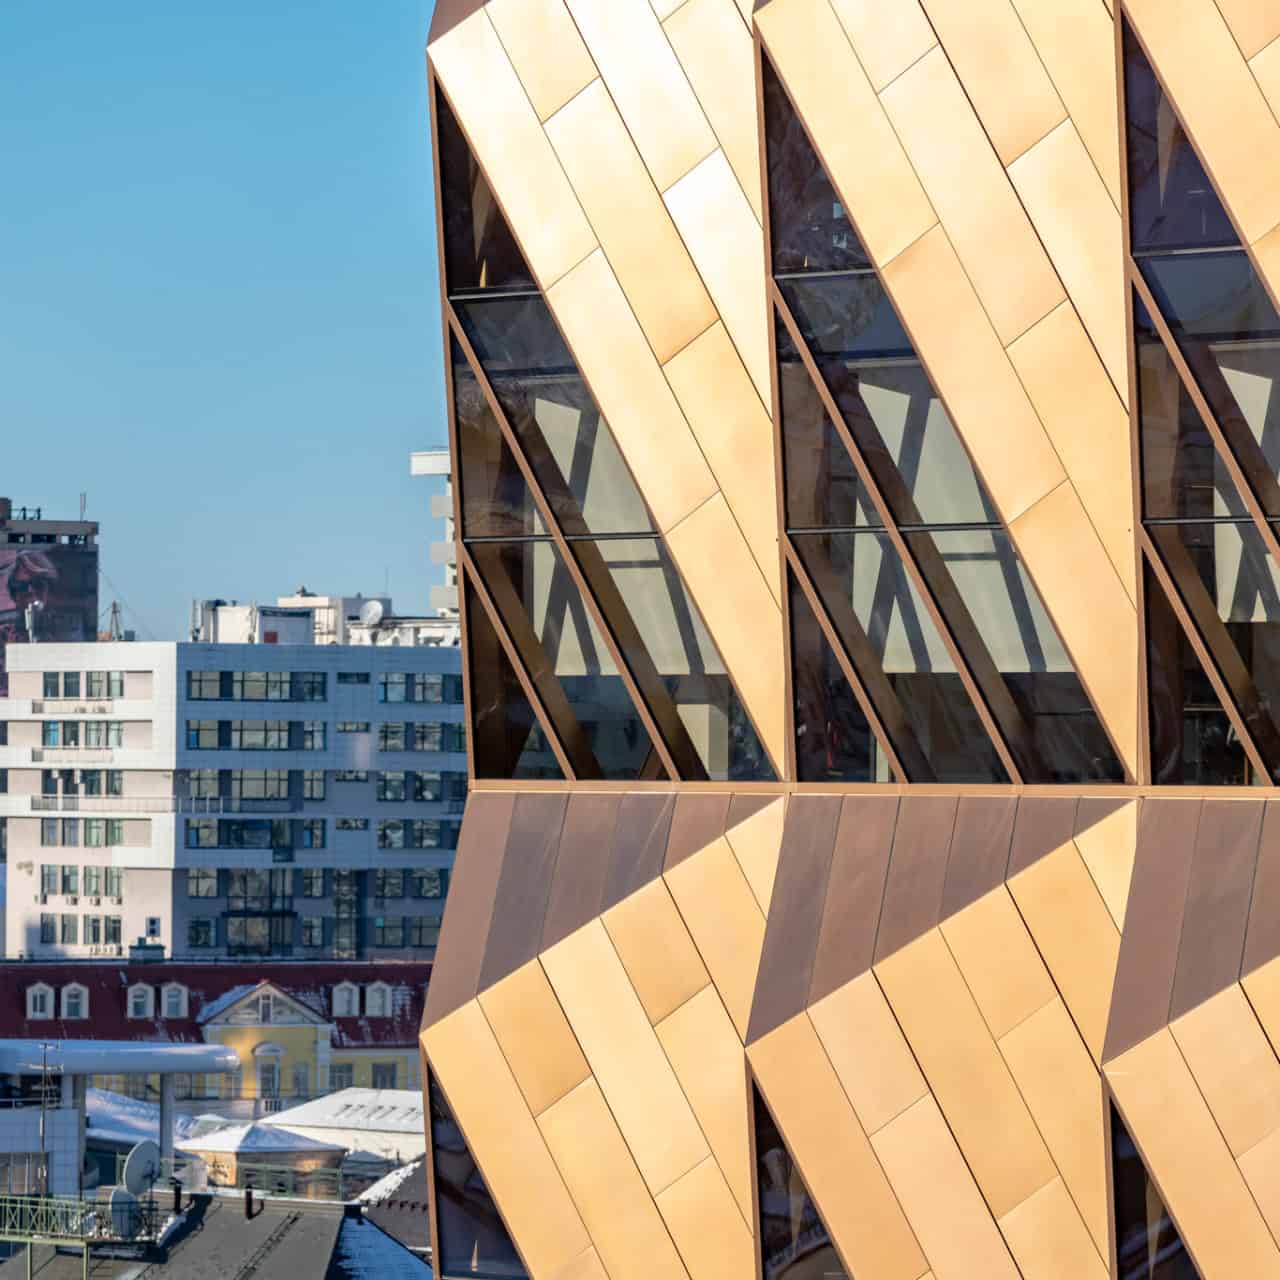 RCC Headquarters – Foster and Partners’ first office building in Russia opens